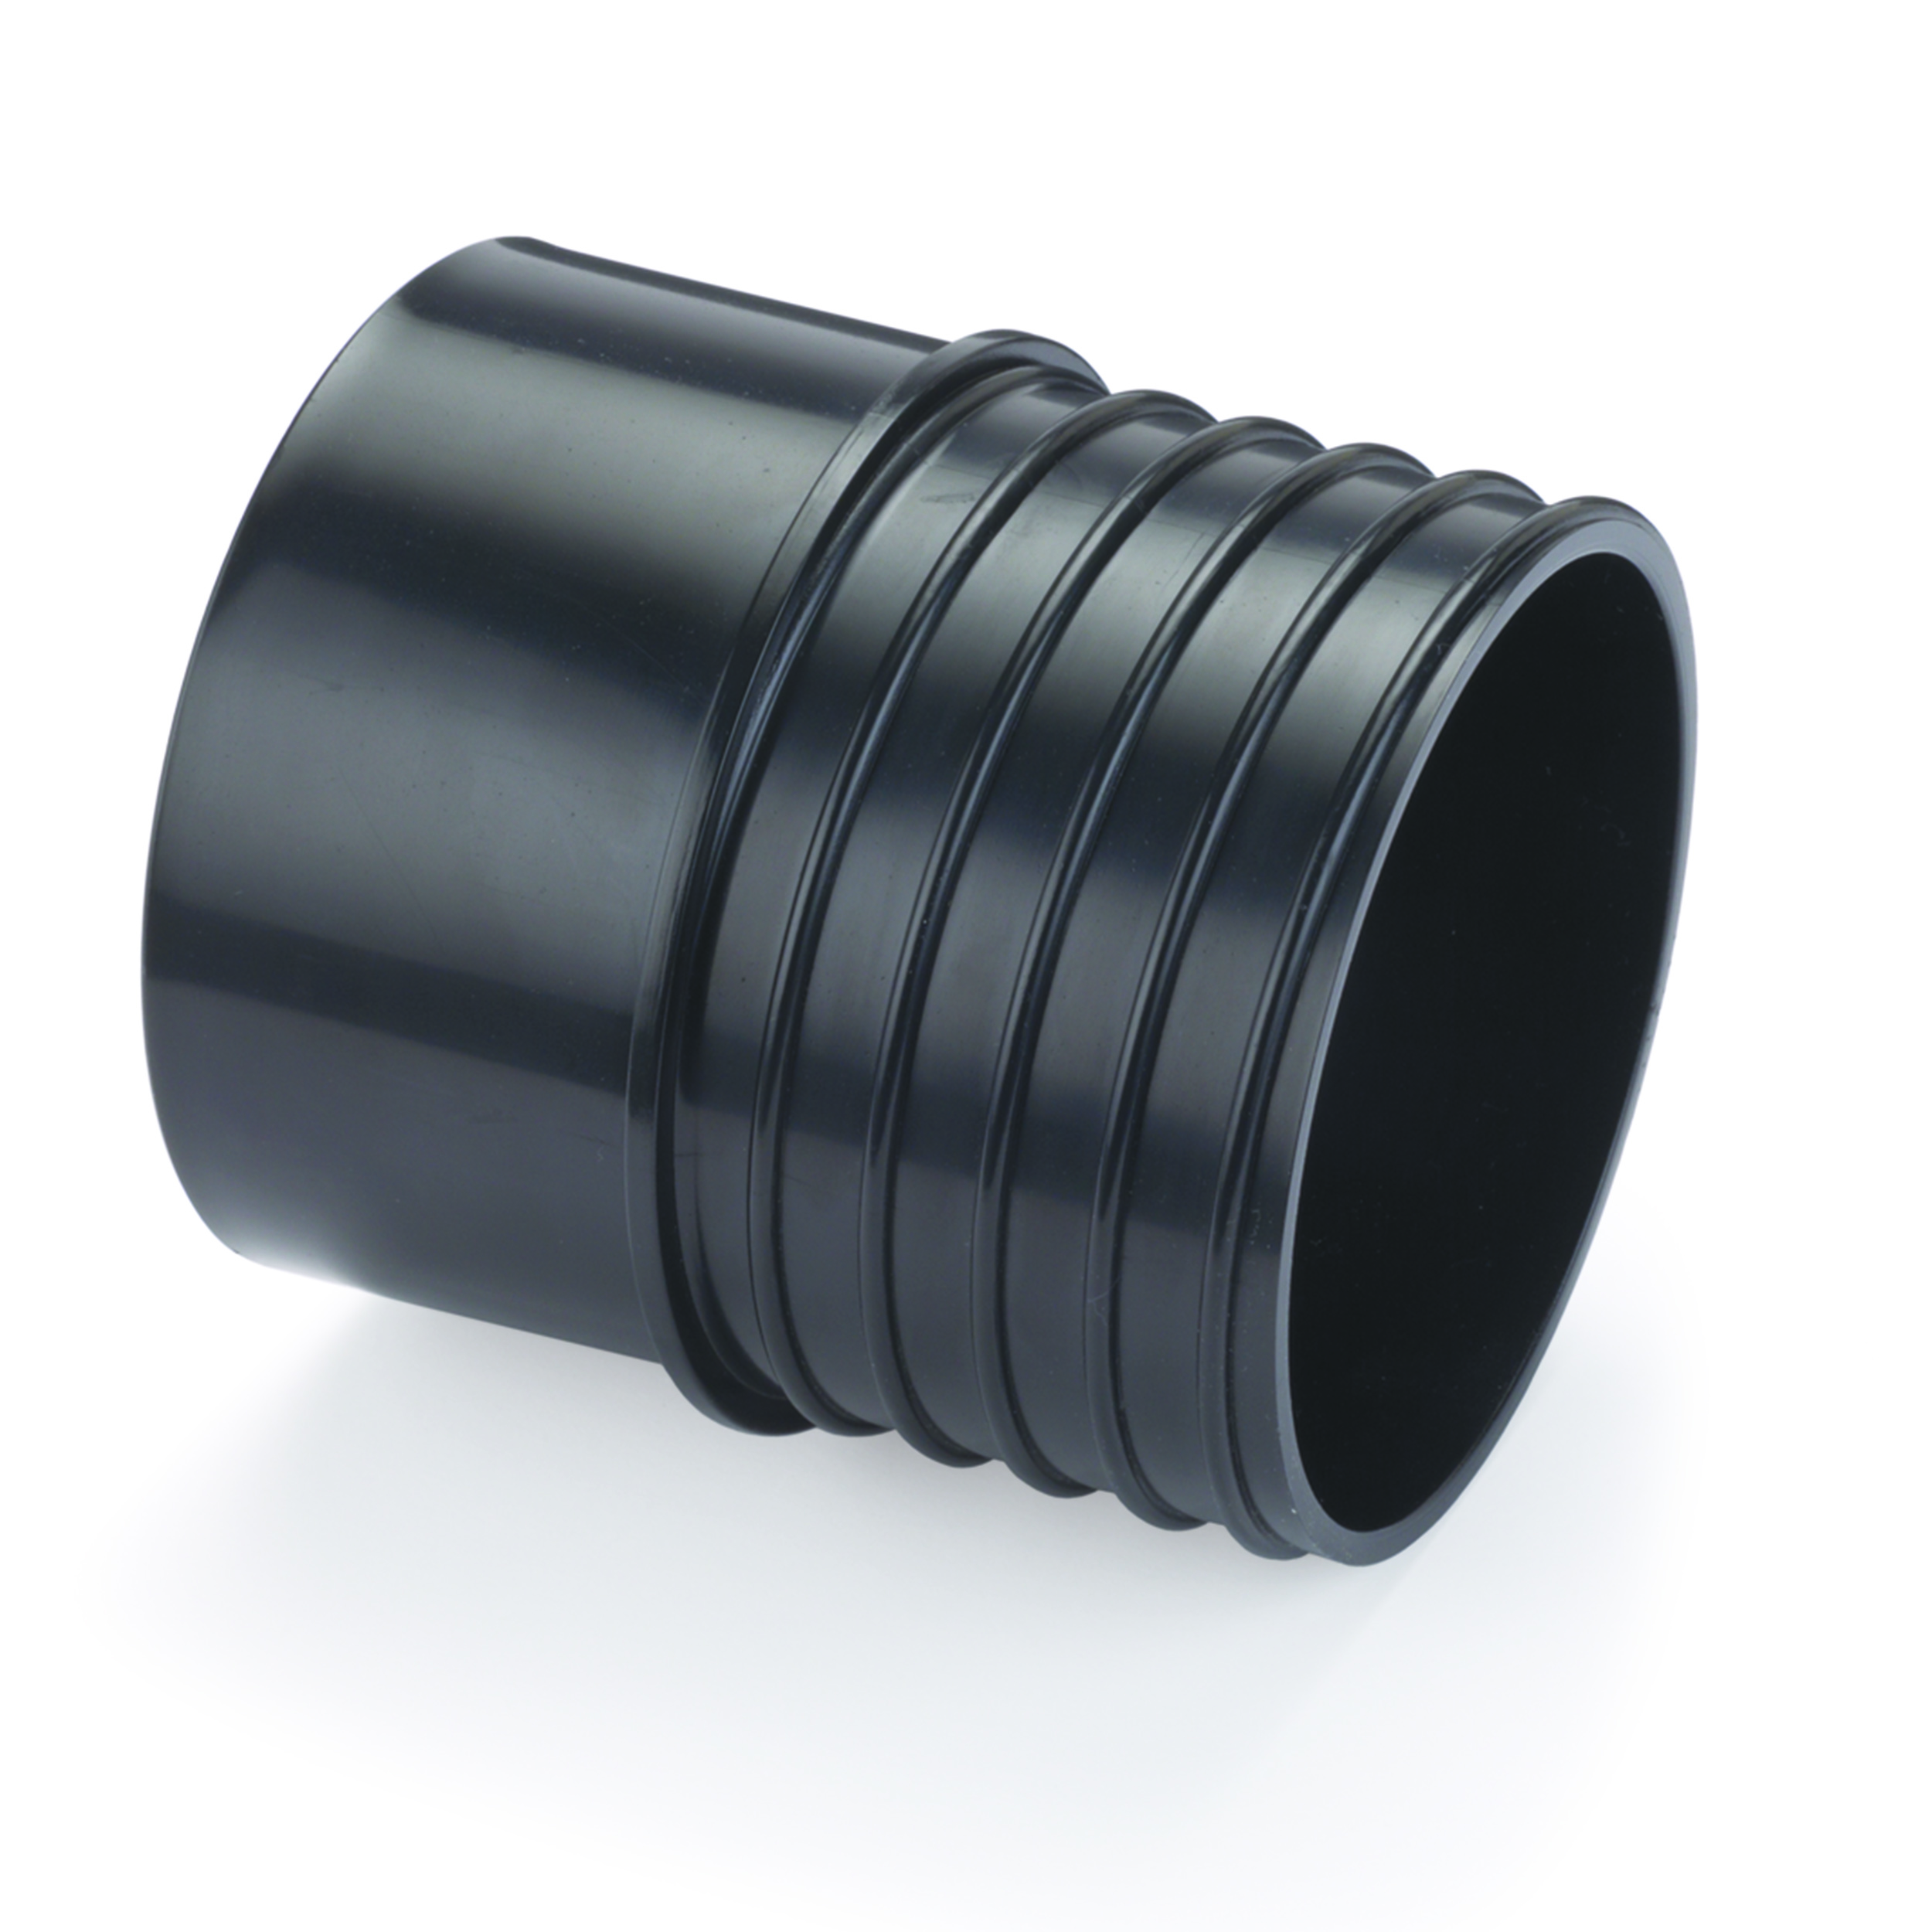 Dwv Pvc Pipe To 4-inch Hose Dust Collection Adapter Fitting